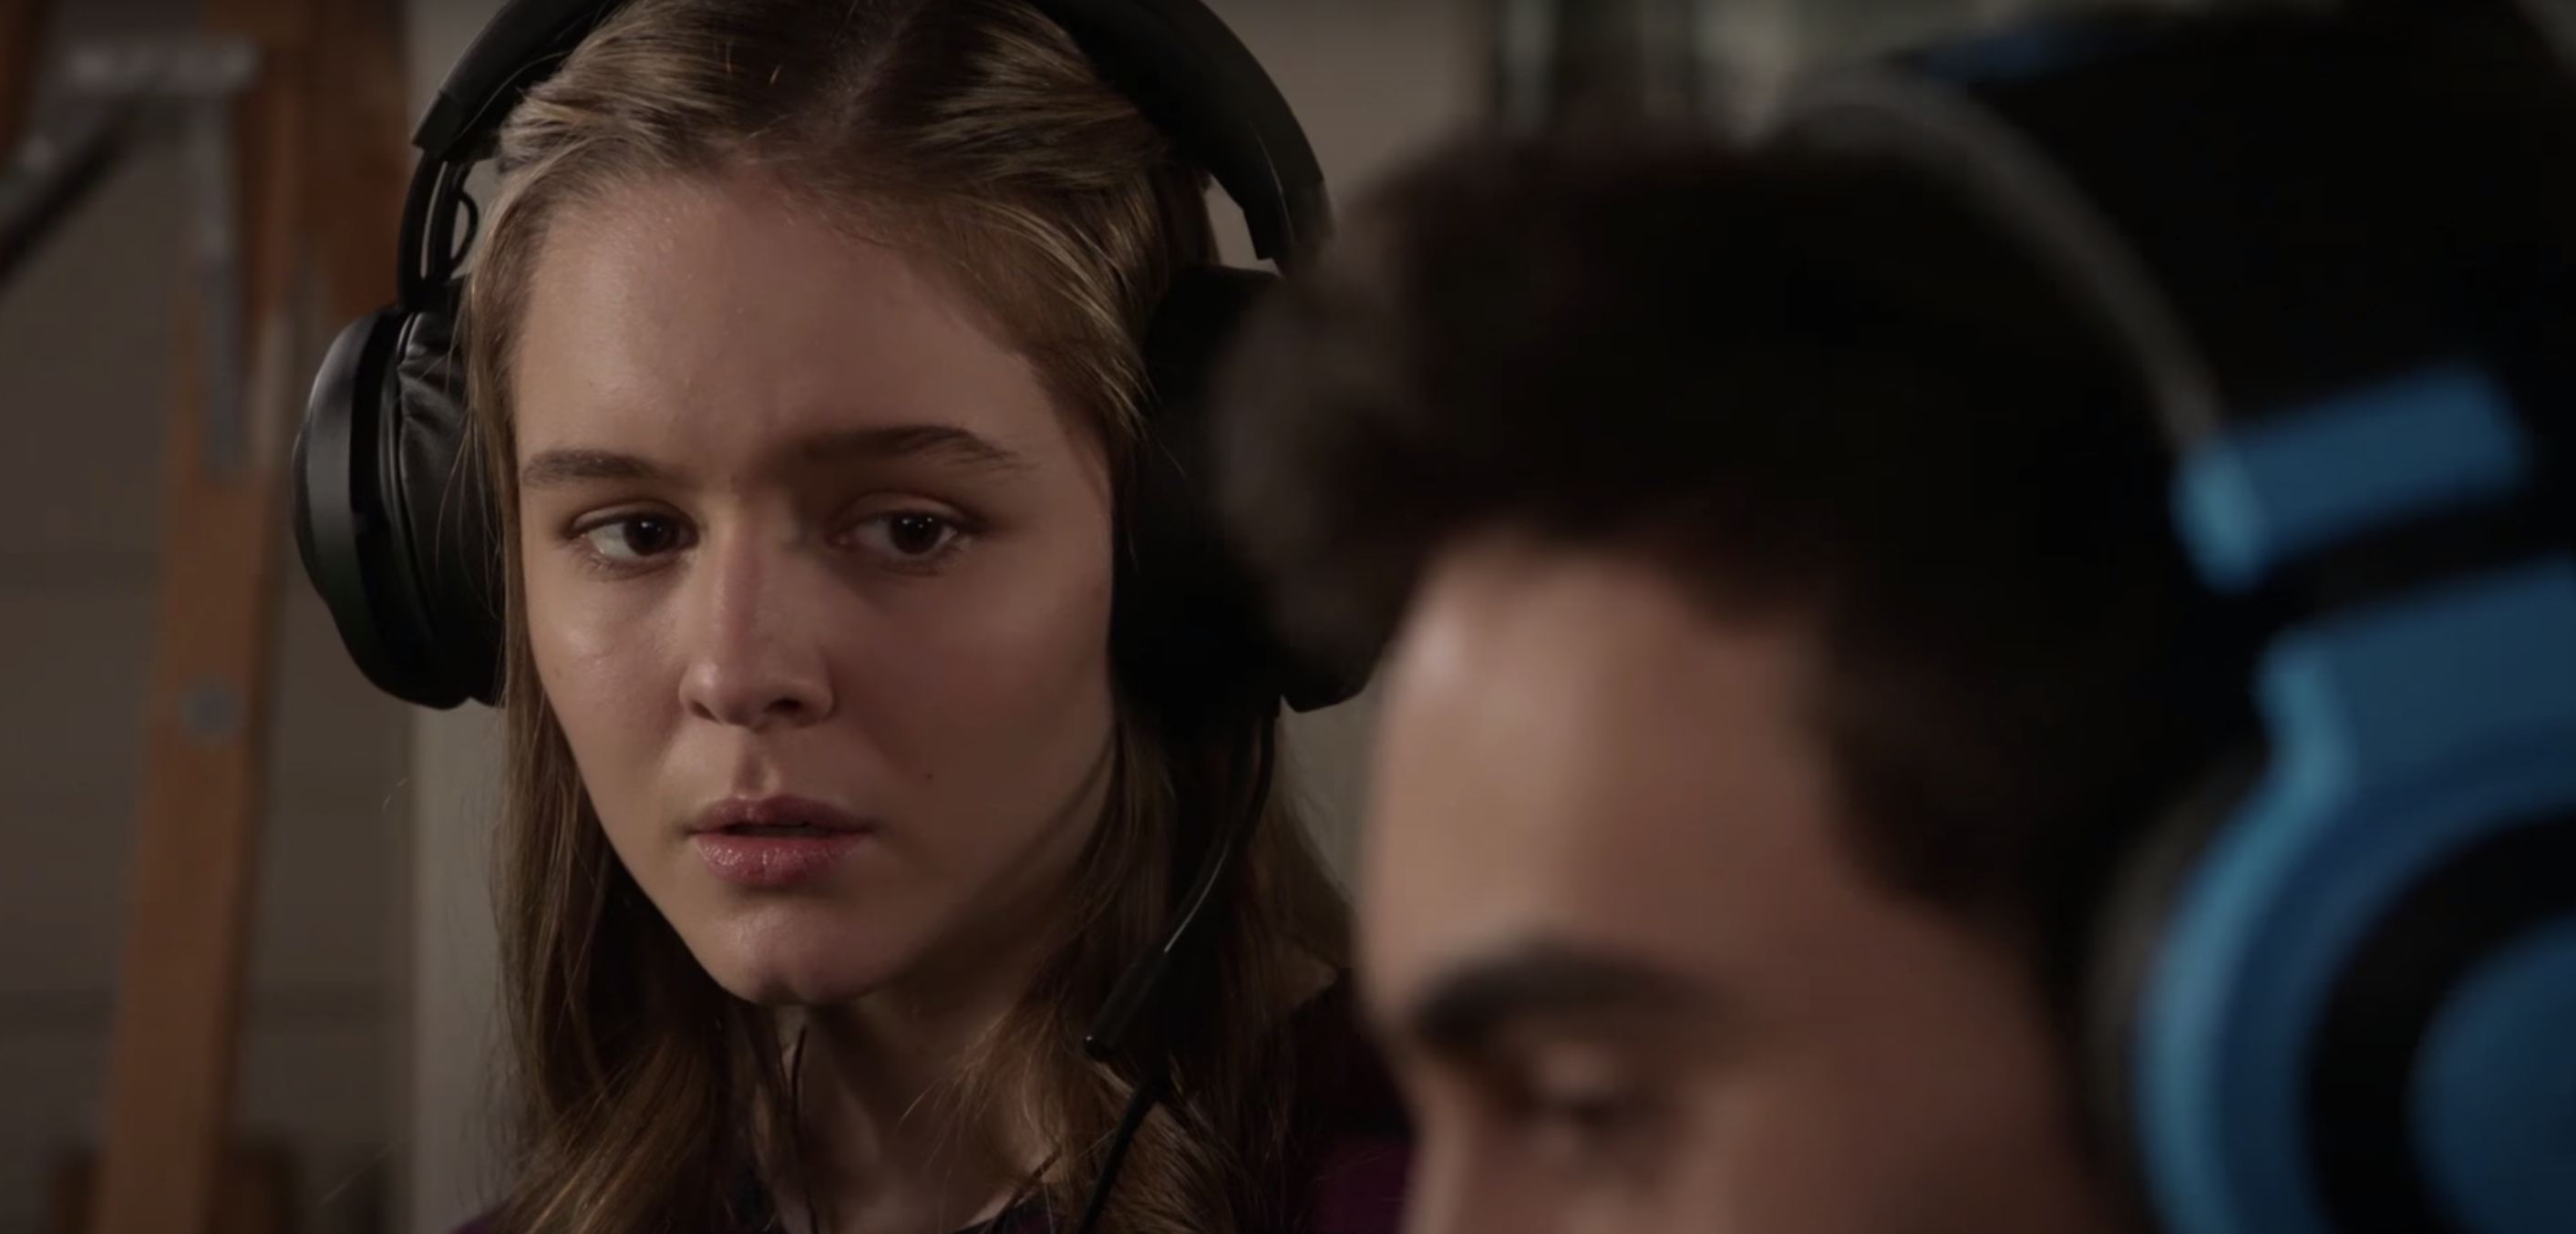 A young woman with a headset on looks upset